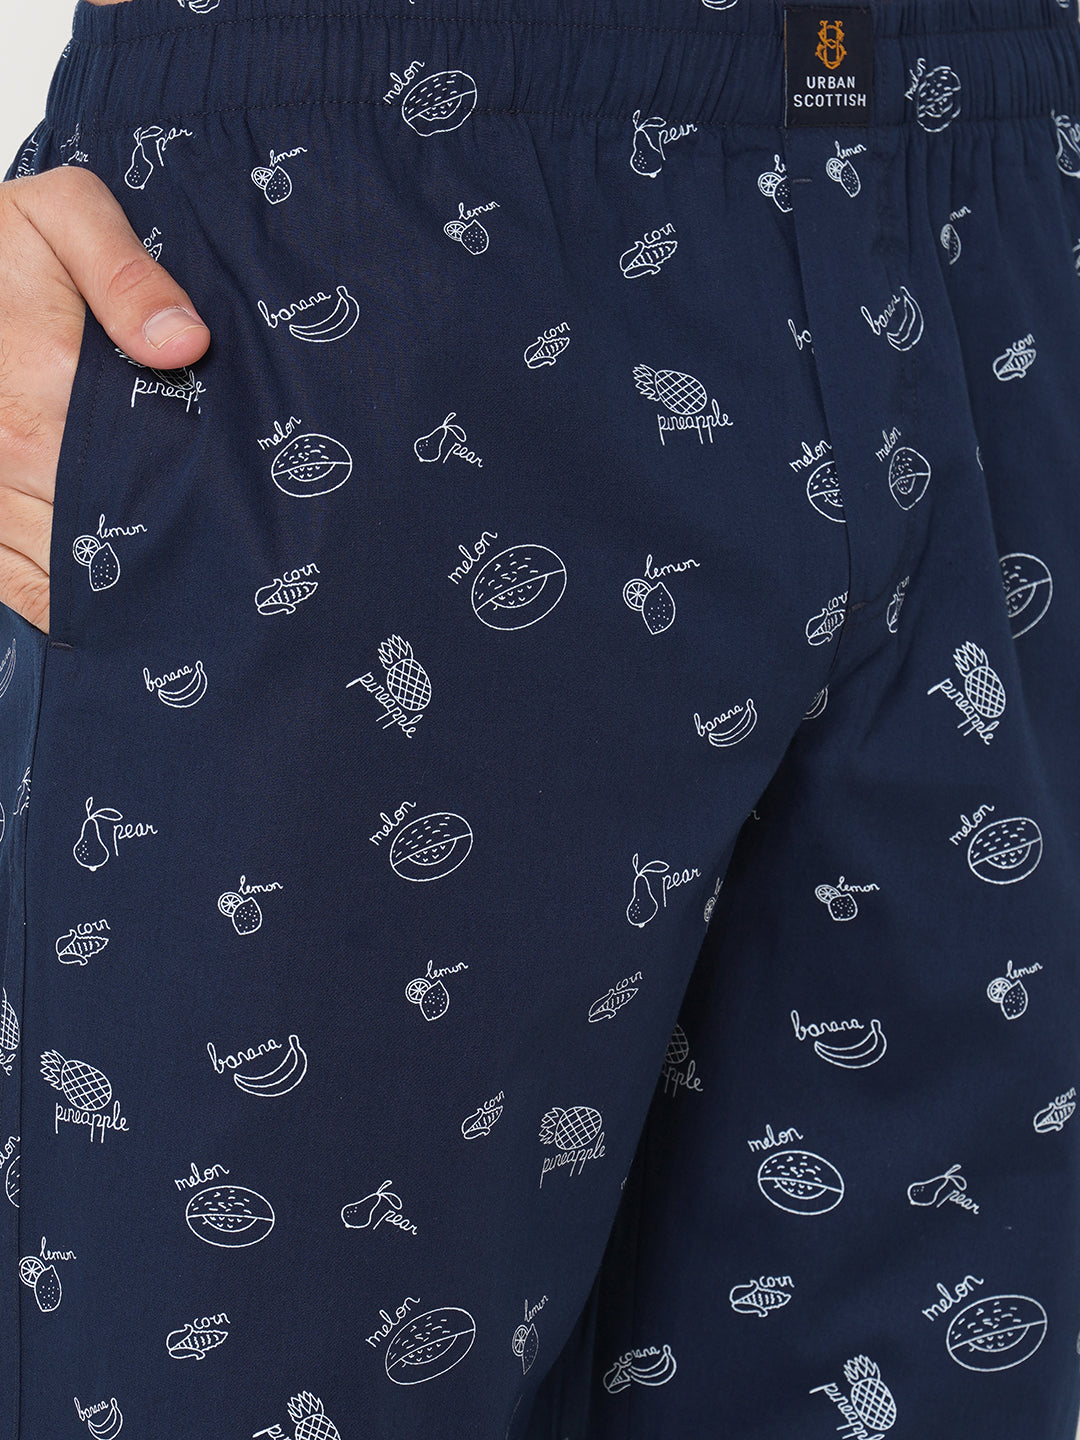 Men's Printed, Navy, Cotton, Regular Fit, Elasticated, Waistband, Pyjama  With Side Pockets